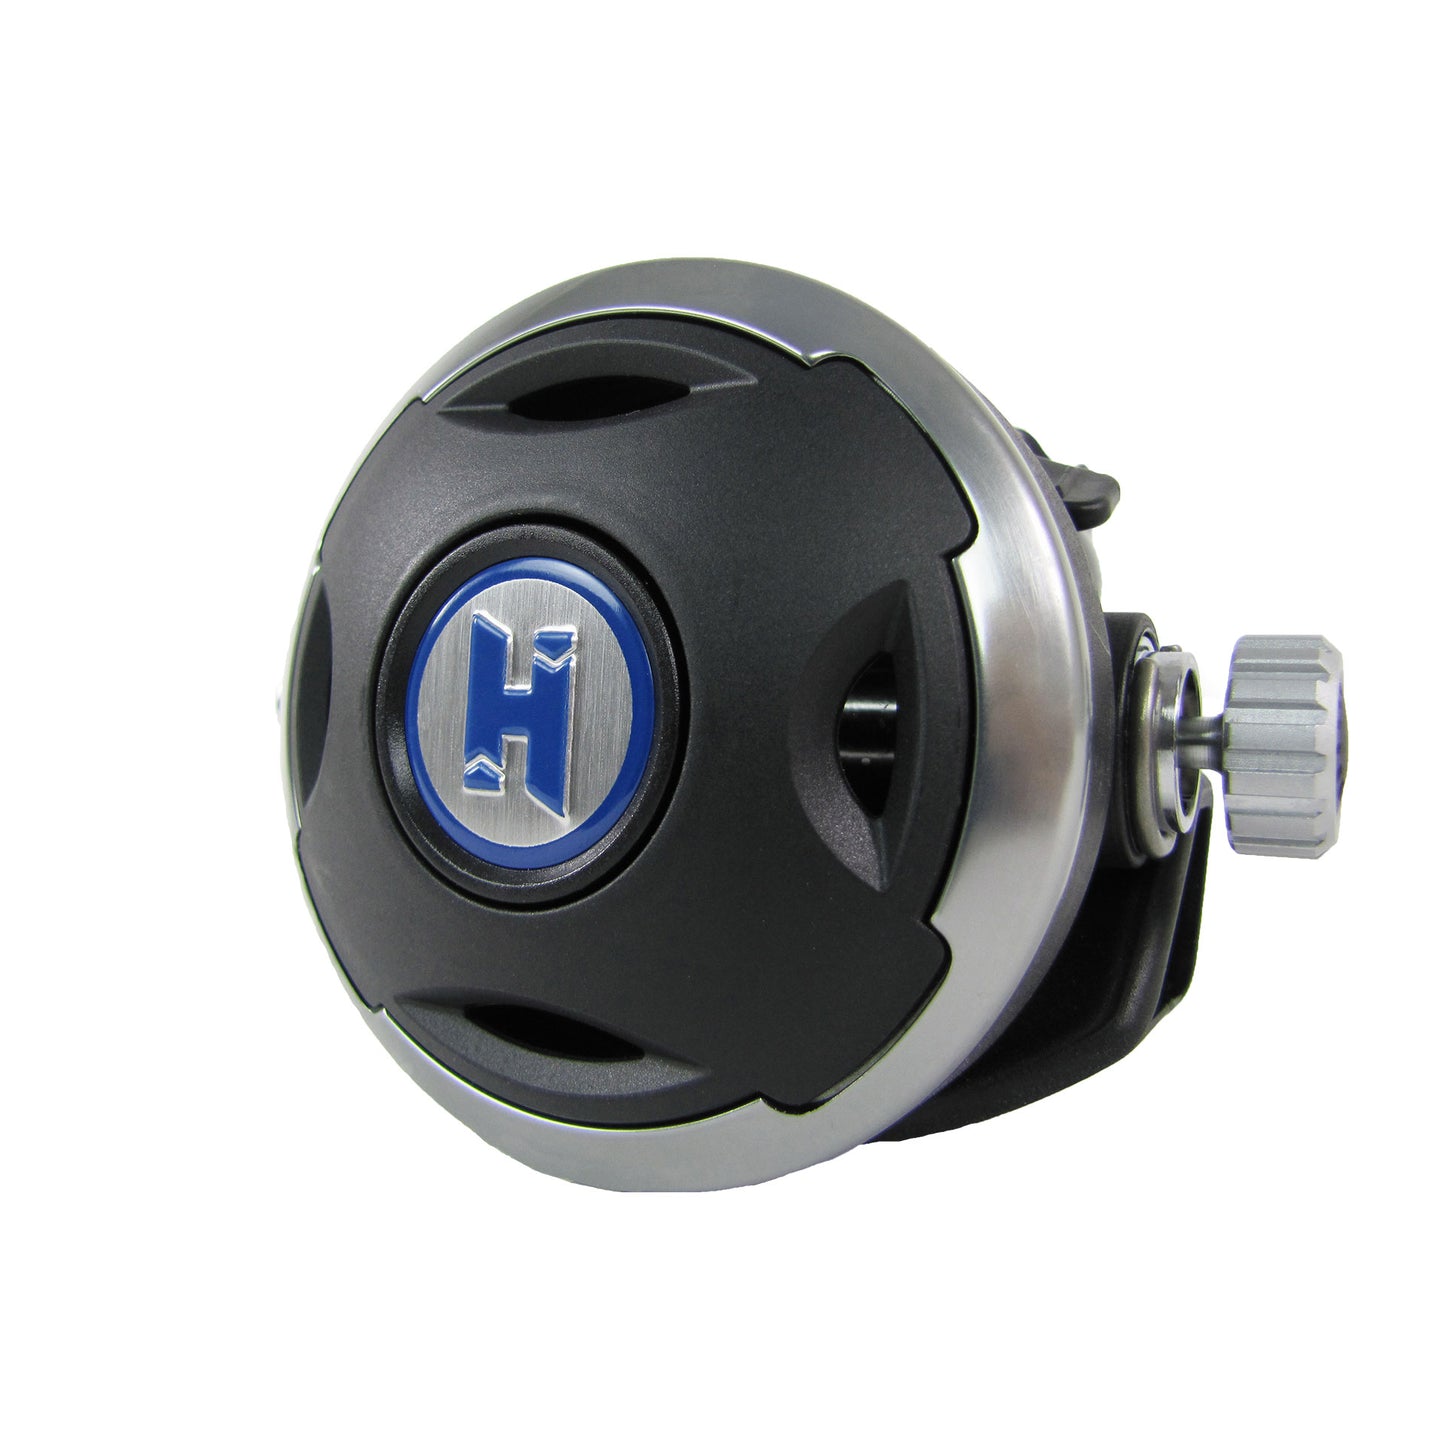 Halcyon Halo Second Stage Regulator or Parts Kit